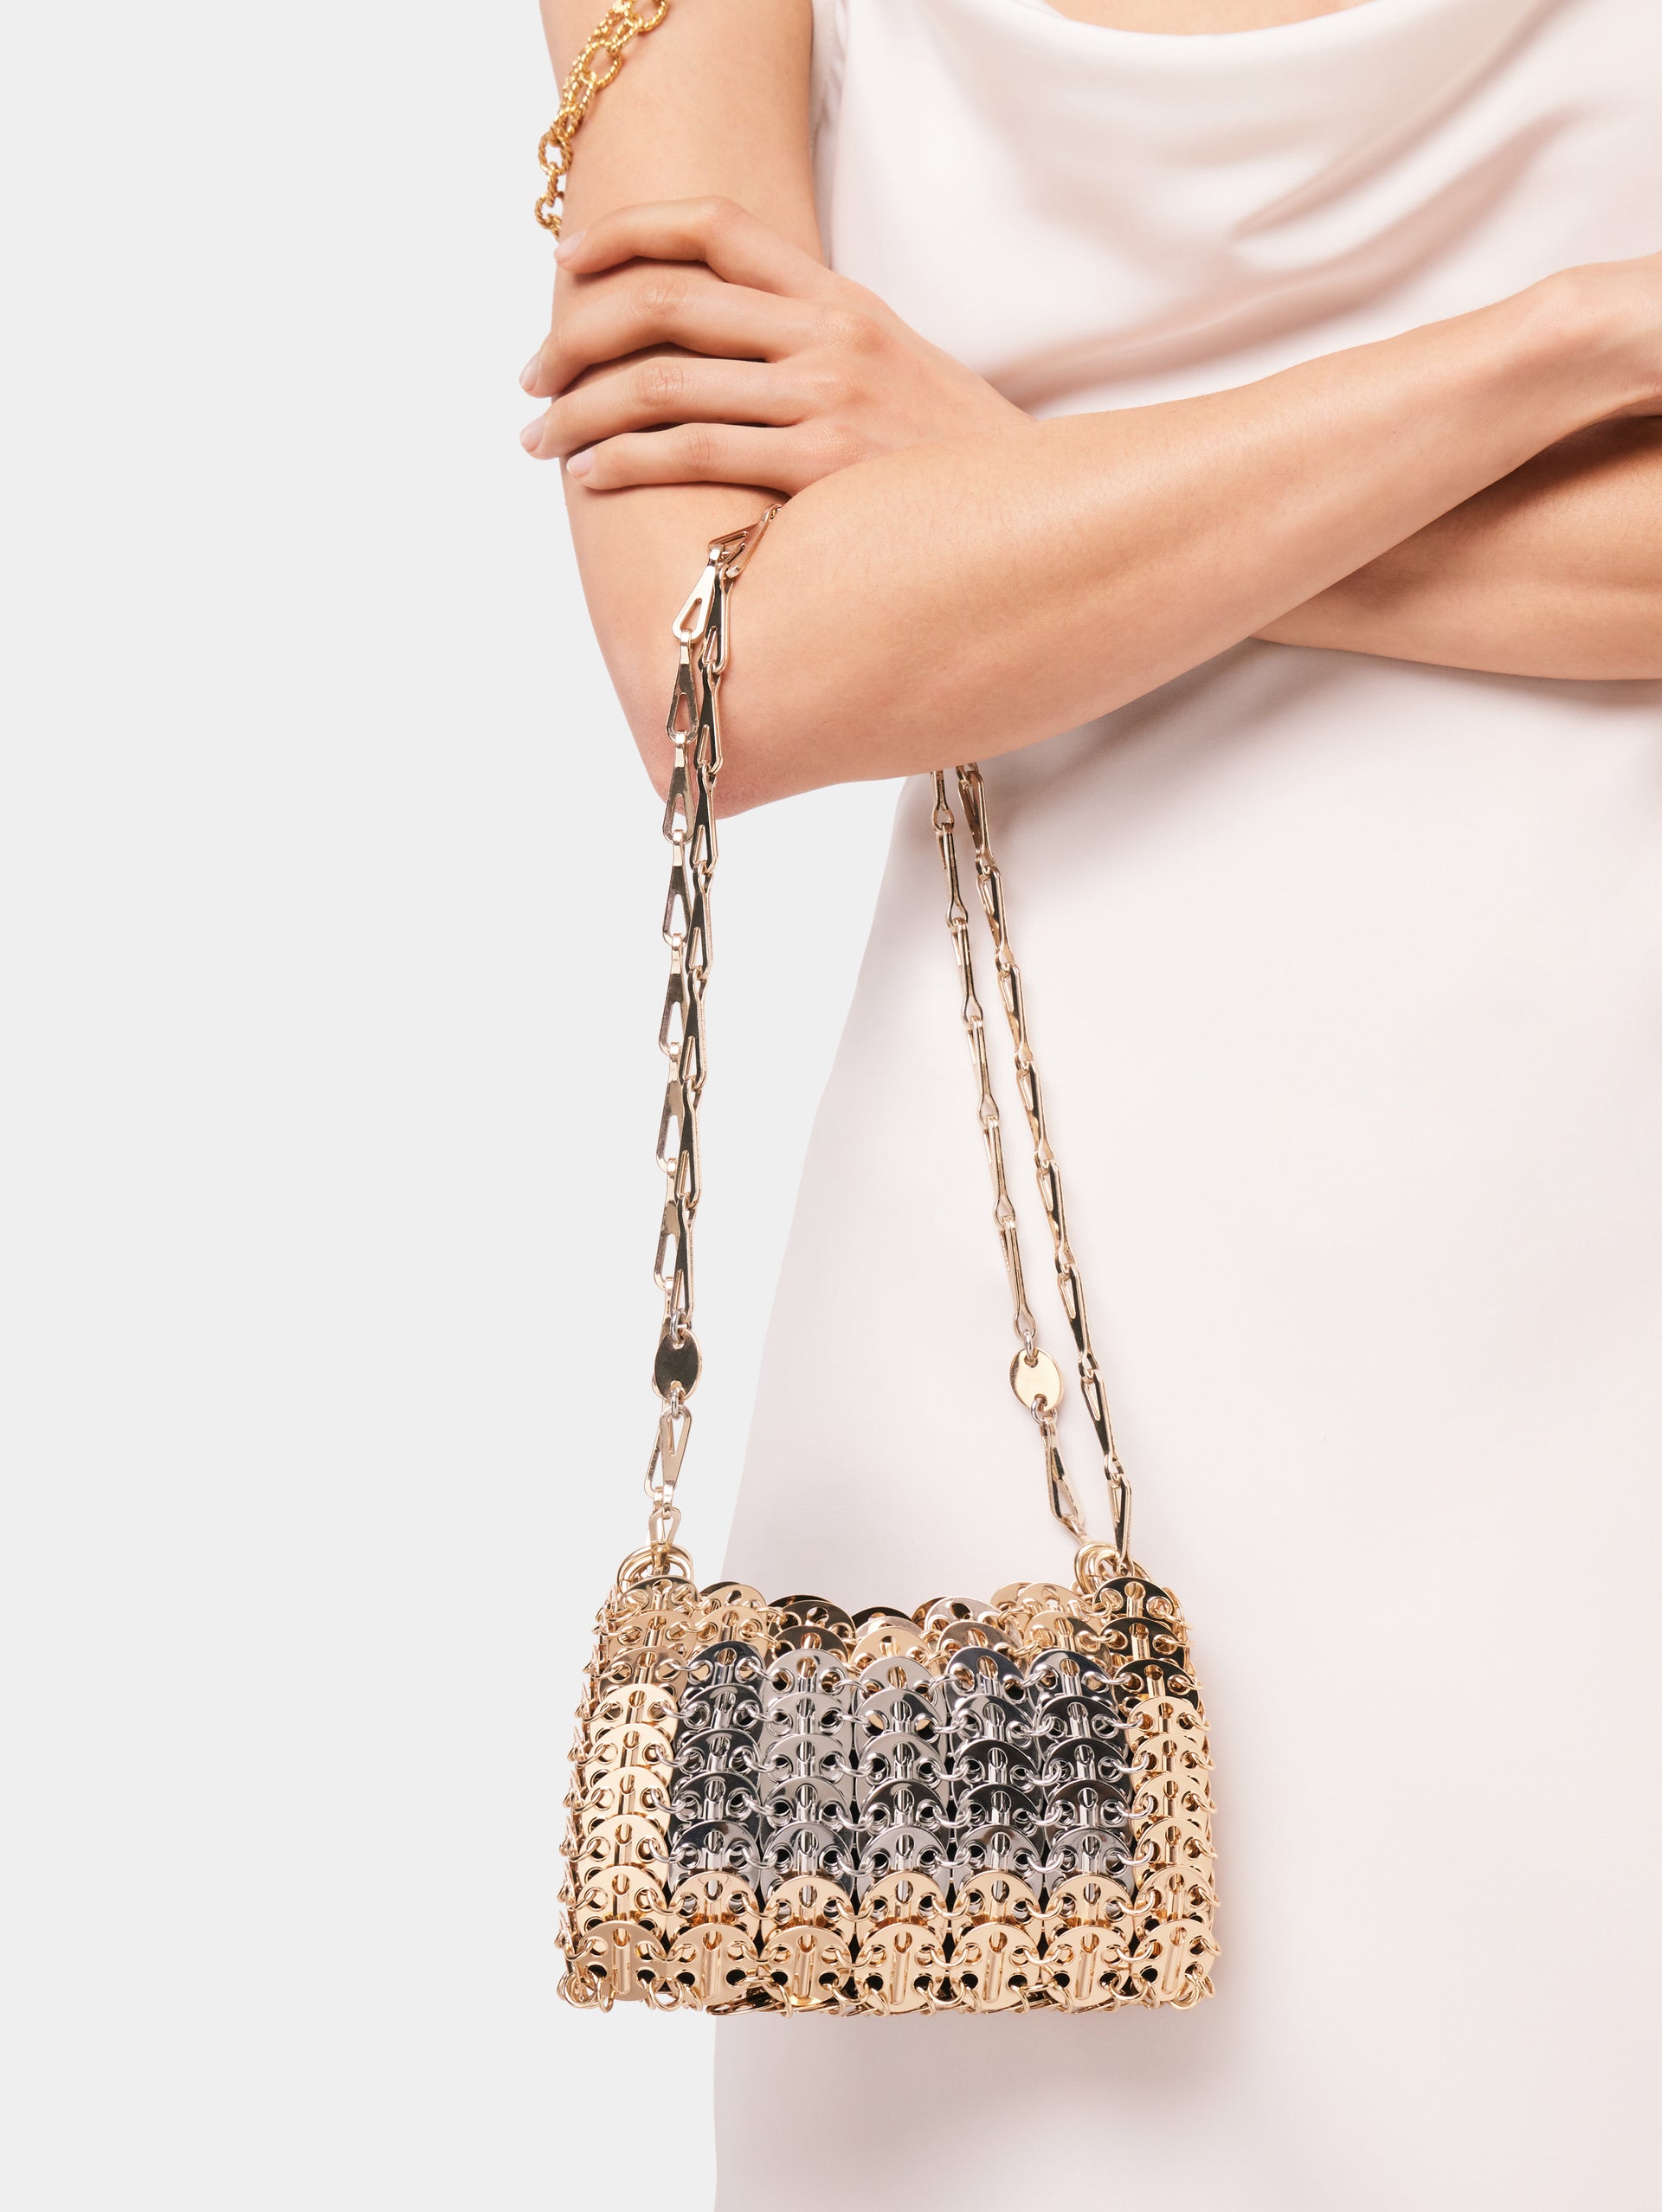 Iconic gold and silver  nano 1969 bag